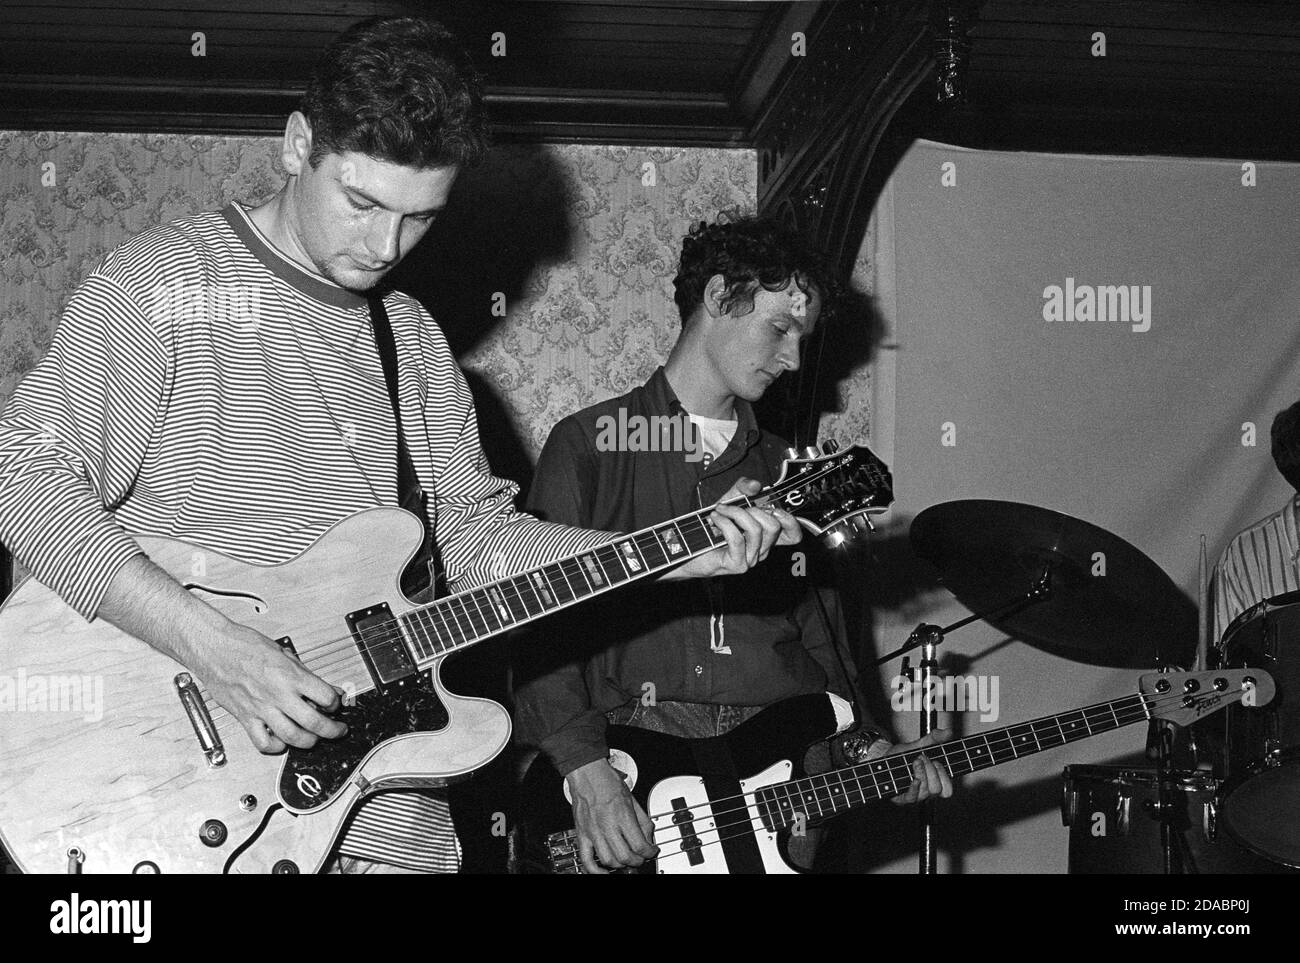 Monochrome image of Gordon Keen and Gerard Love of Glasgow indie band BMX Bandits performing at Esquires, Bedford, UK, in 1990. Stock Photo